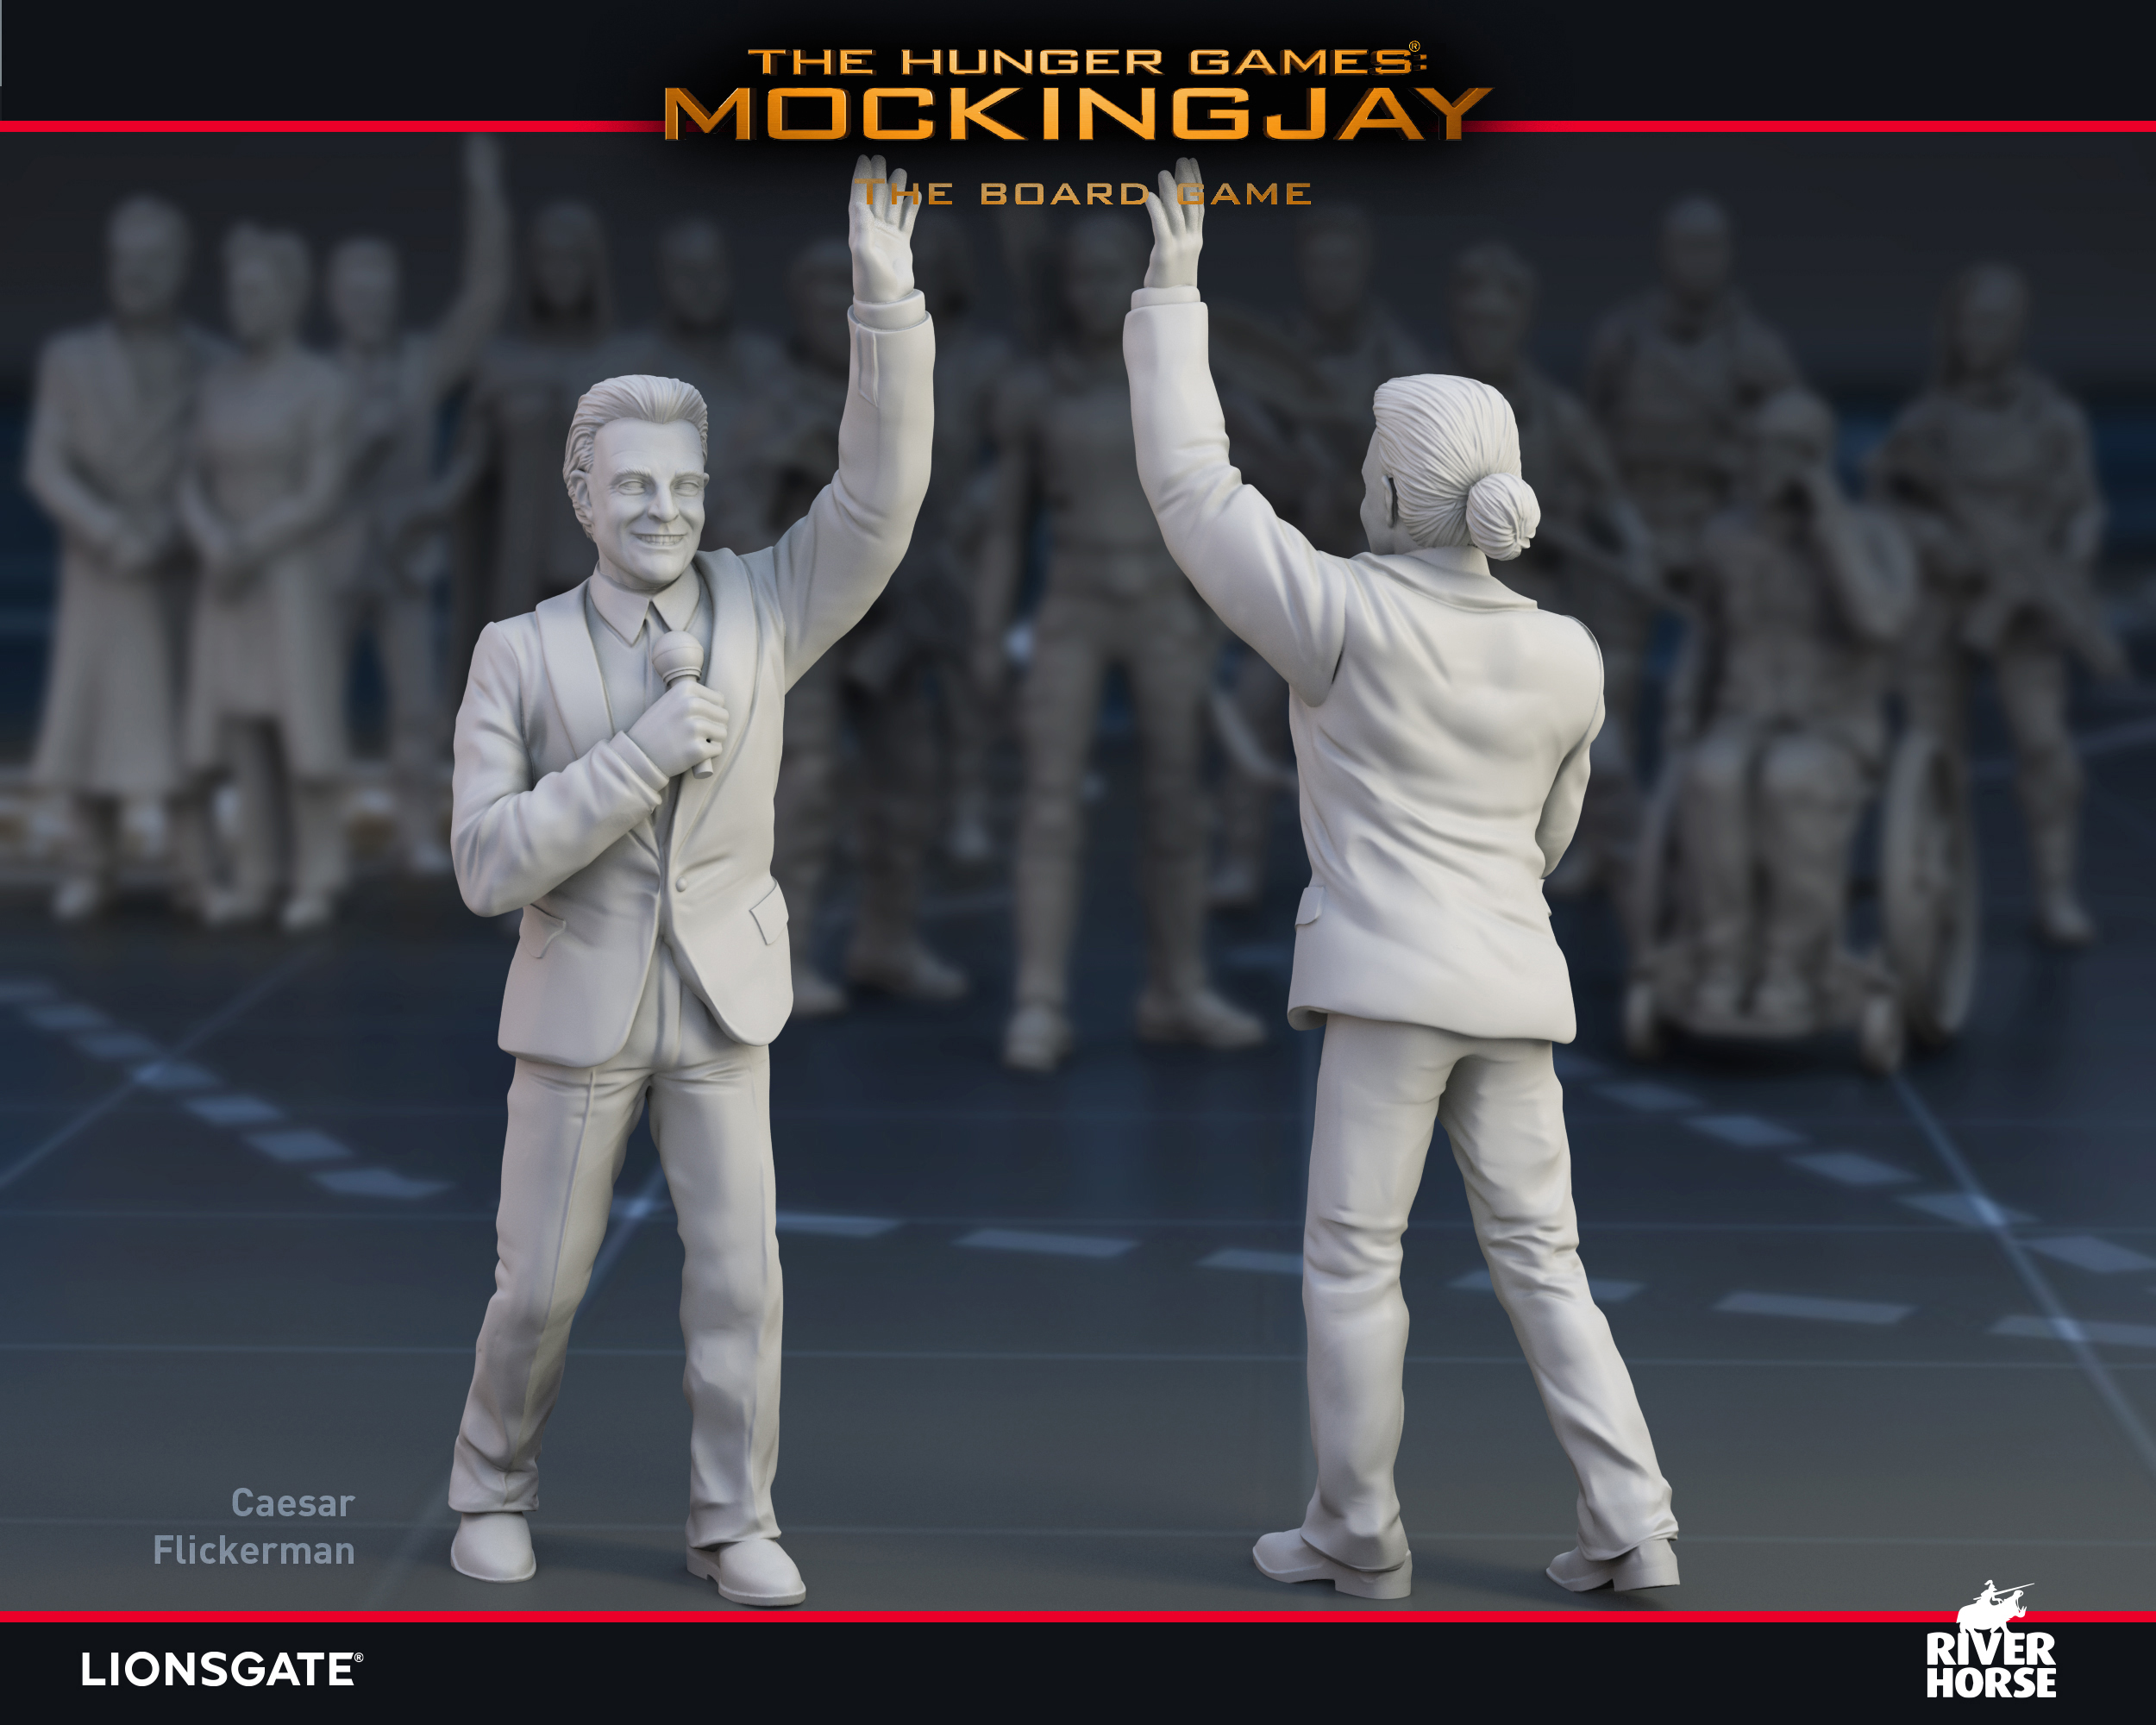 Render of Caesar Flickerman for The Hunger Games: Mockingjay - The Board Game by River Horse